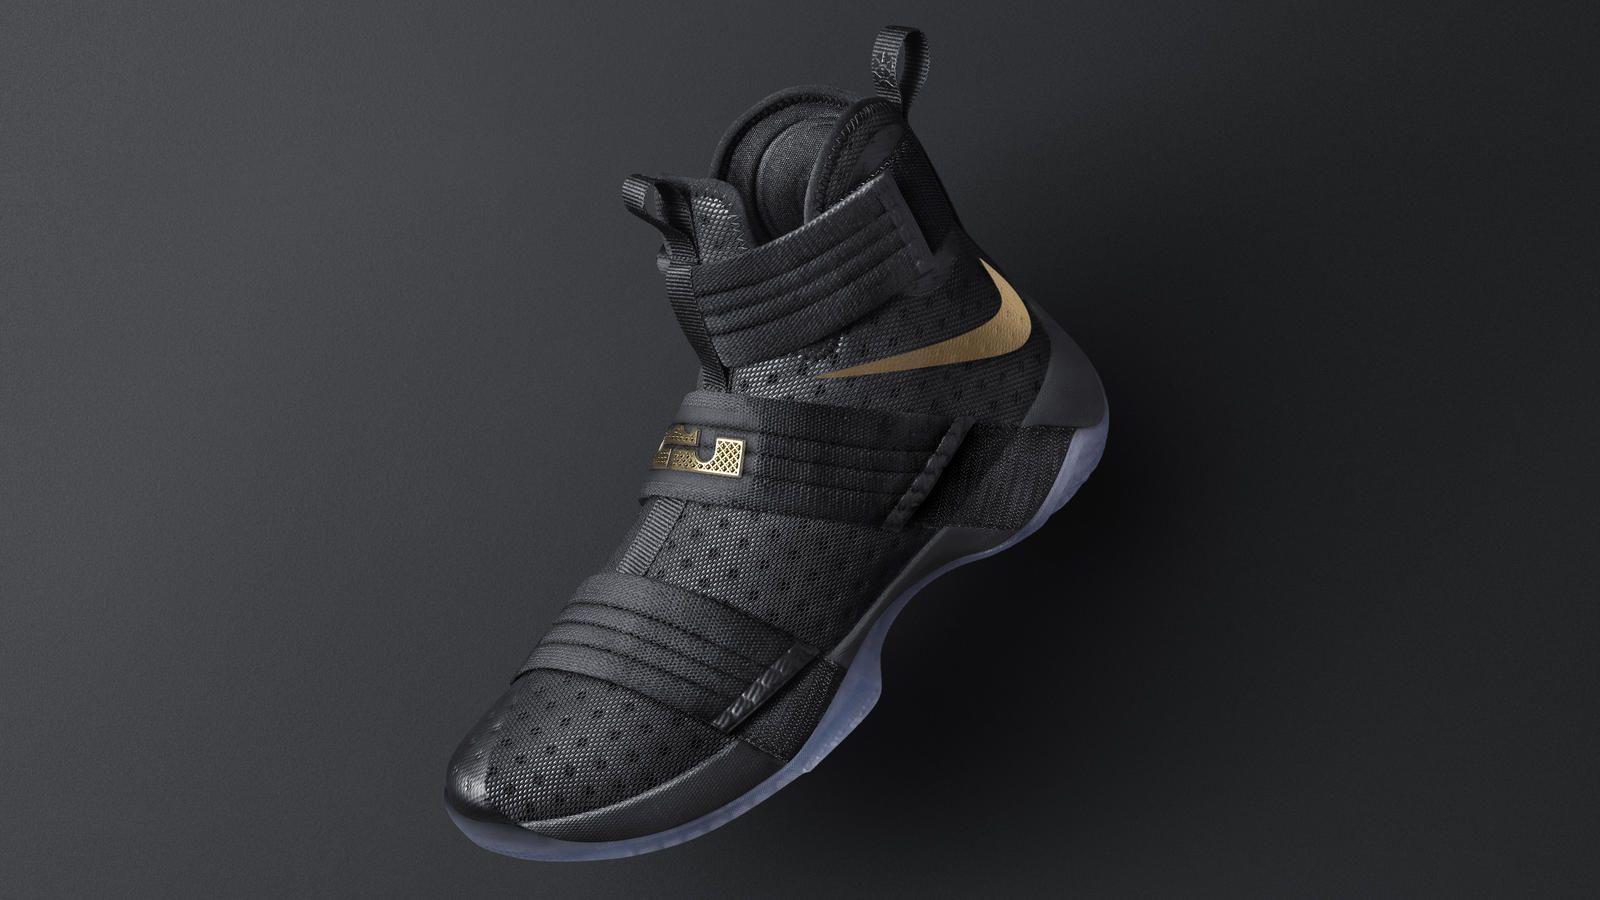 The Nike LeBron Zoom Soldier 10 iD Celebrates The Cavs' Championship